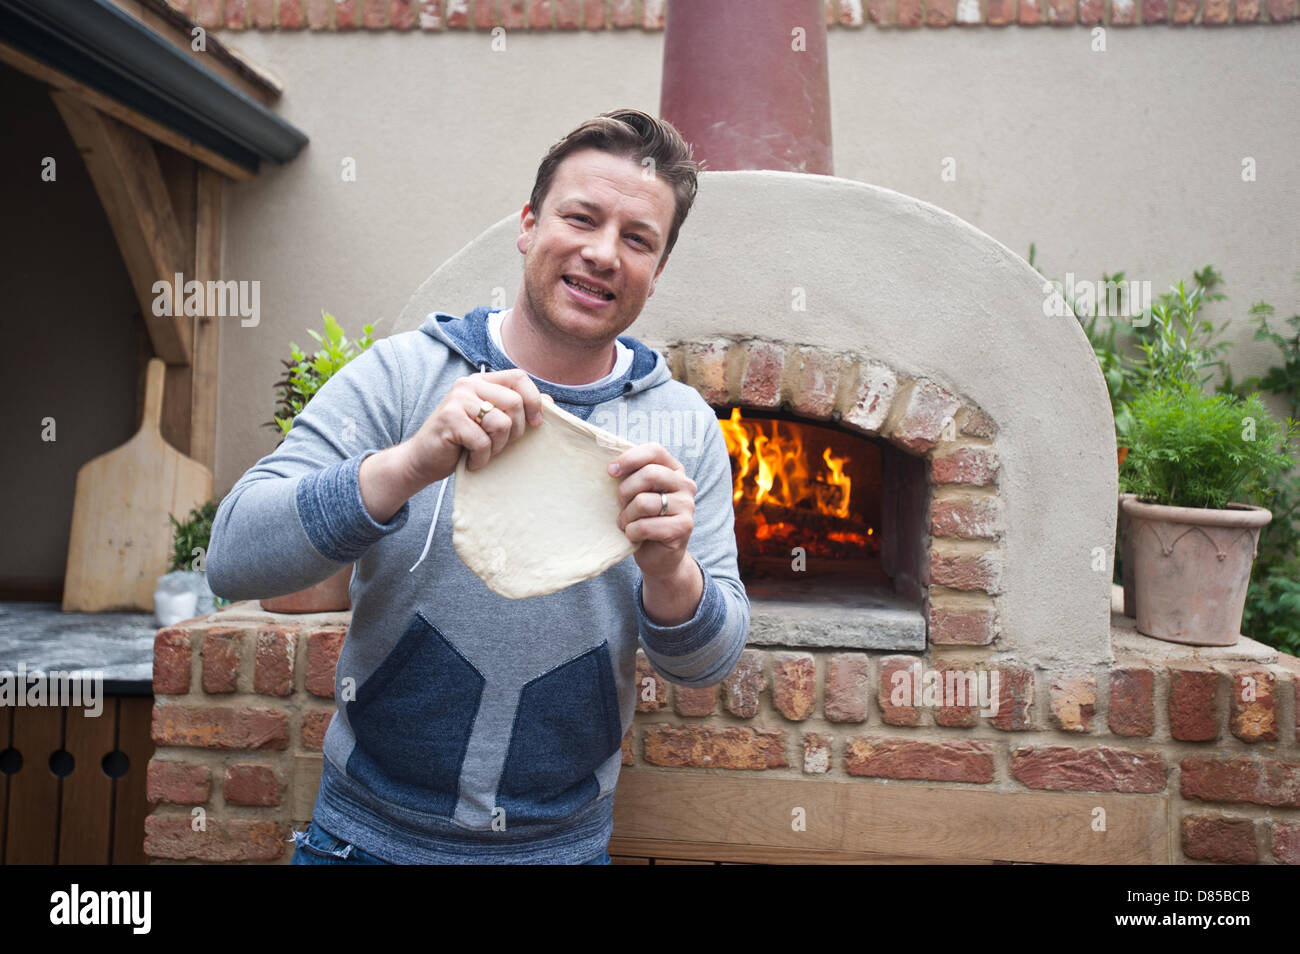 London, UK - 20 May 2013: Jamie Oliver cooks pizza at the Gaze Burvill stand during the RHS Chelsea Flower Show 2013 edition press day. Credit: Piero Cruciatti/Alamy Live News Stock Photo